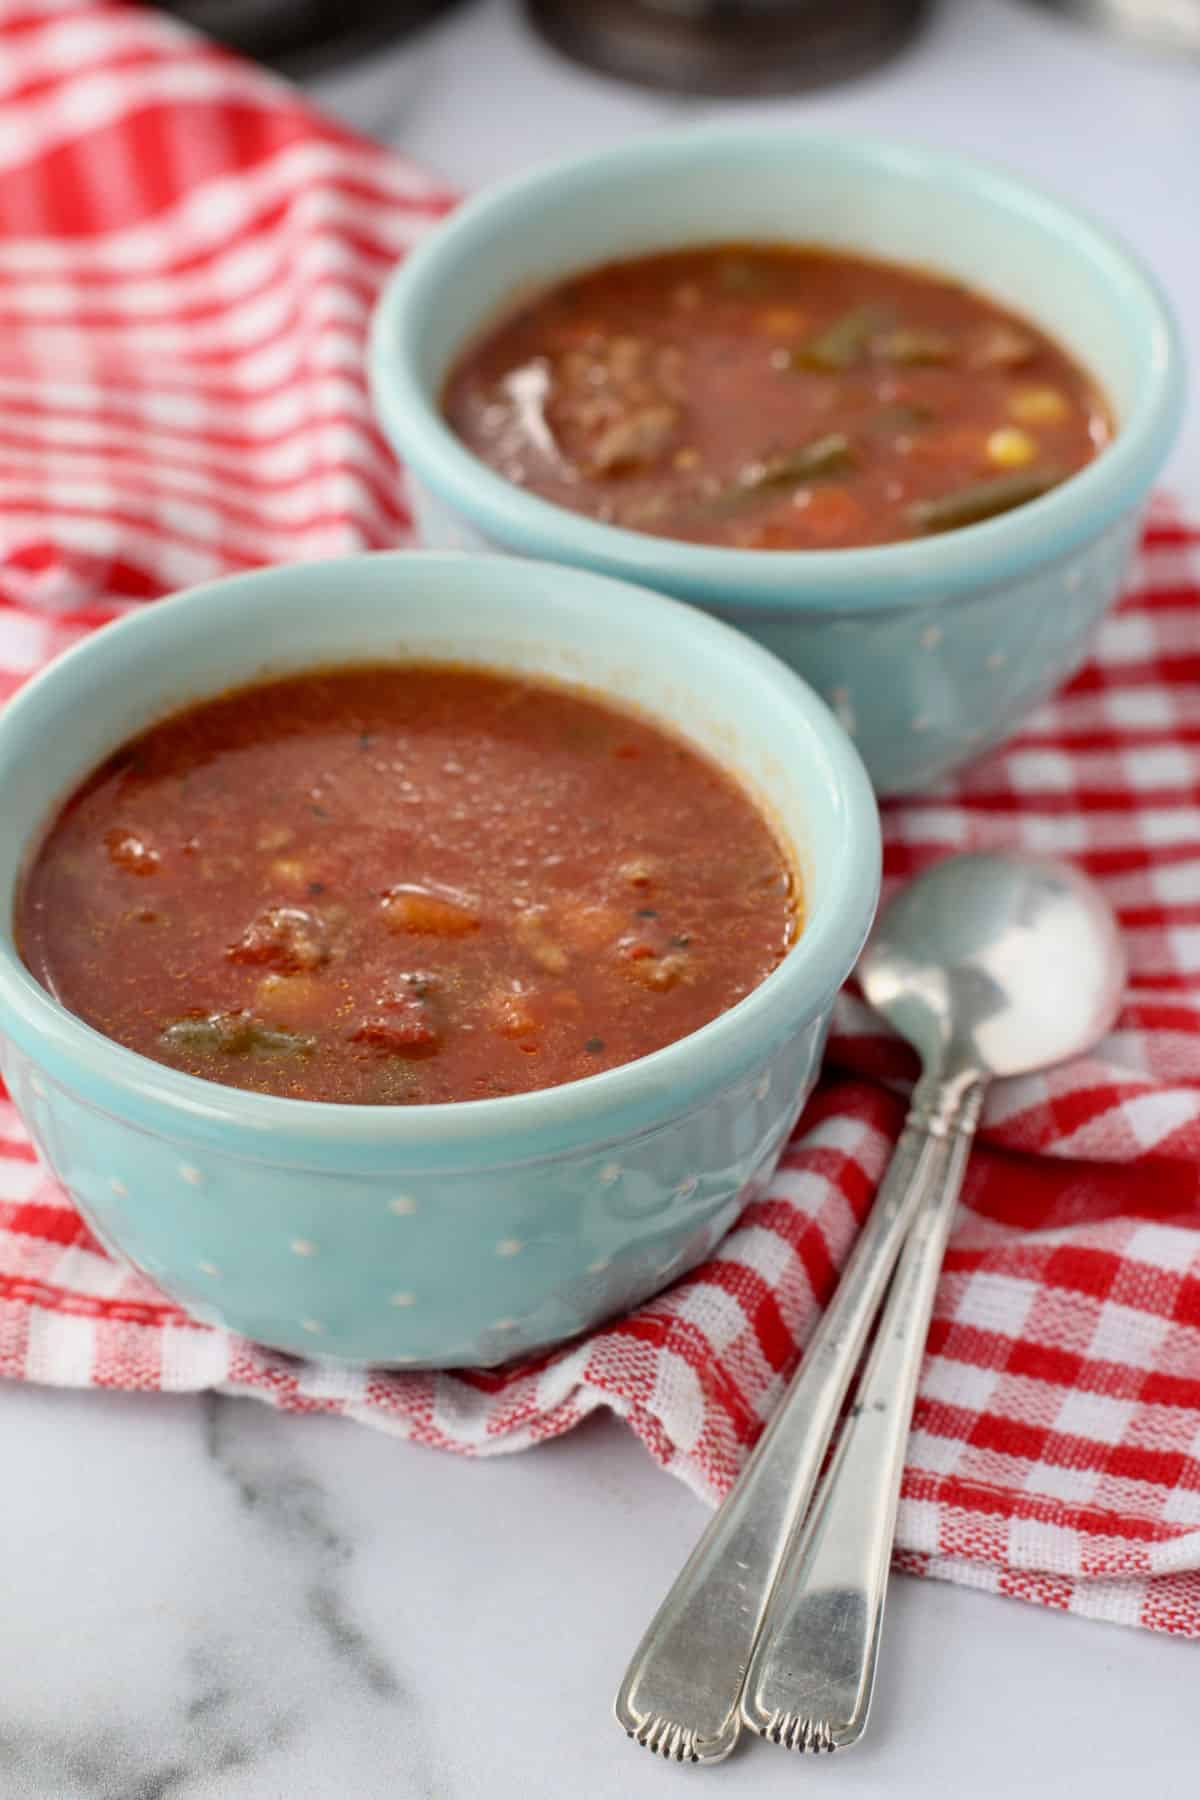 Easy Slow Cooker Beef and Vegetable Soup in small blue bowls.